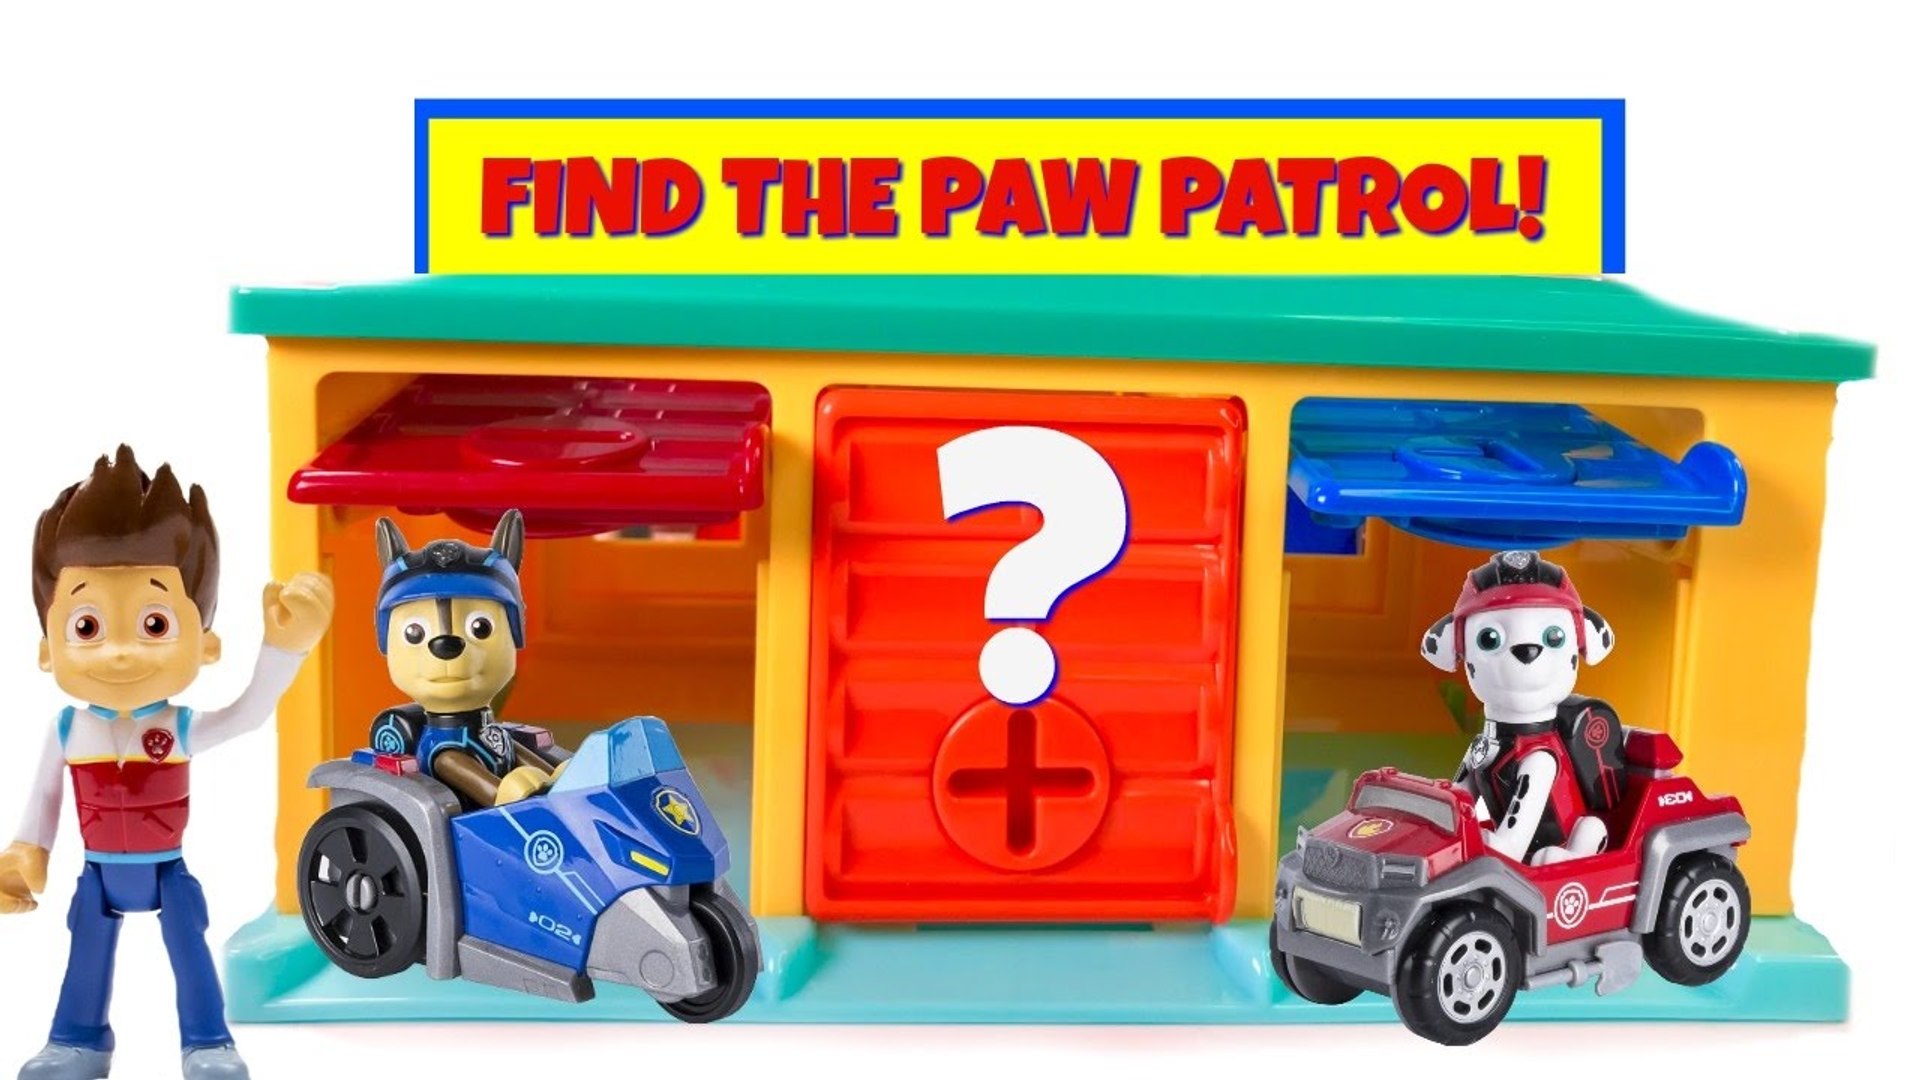 øge Bliv mandat Paw Patrol Hidden in Little Bus Tayo Garage Match Colors Find Mission Pups  - video Dailymotion